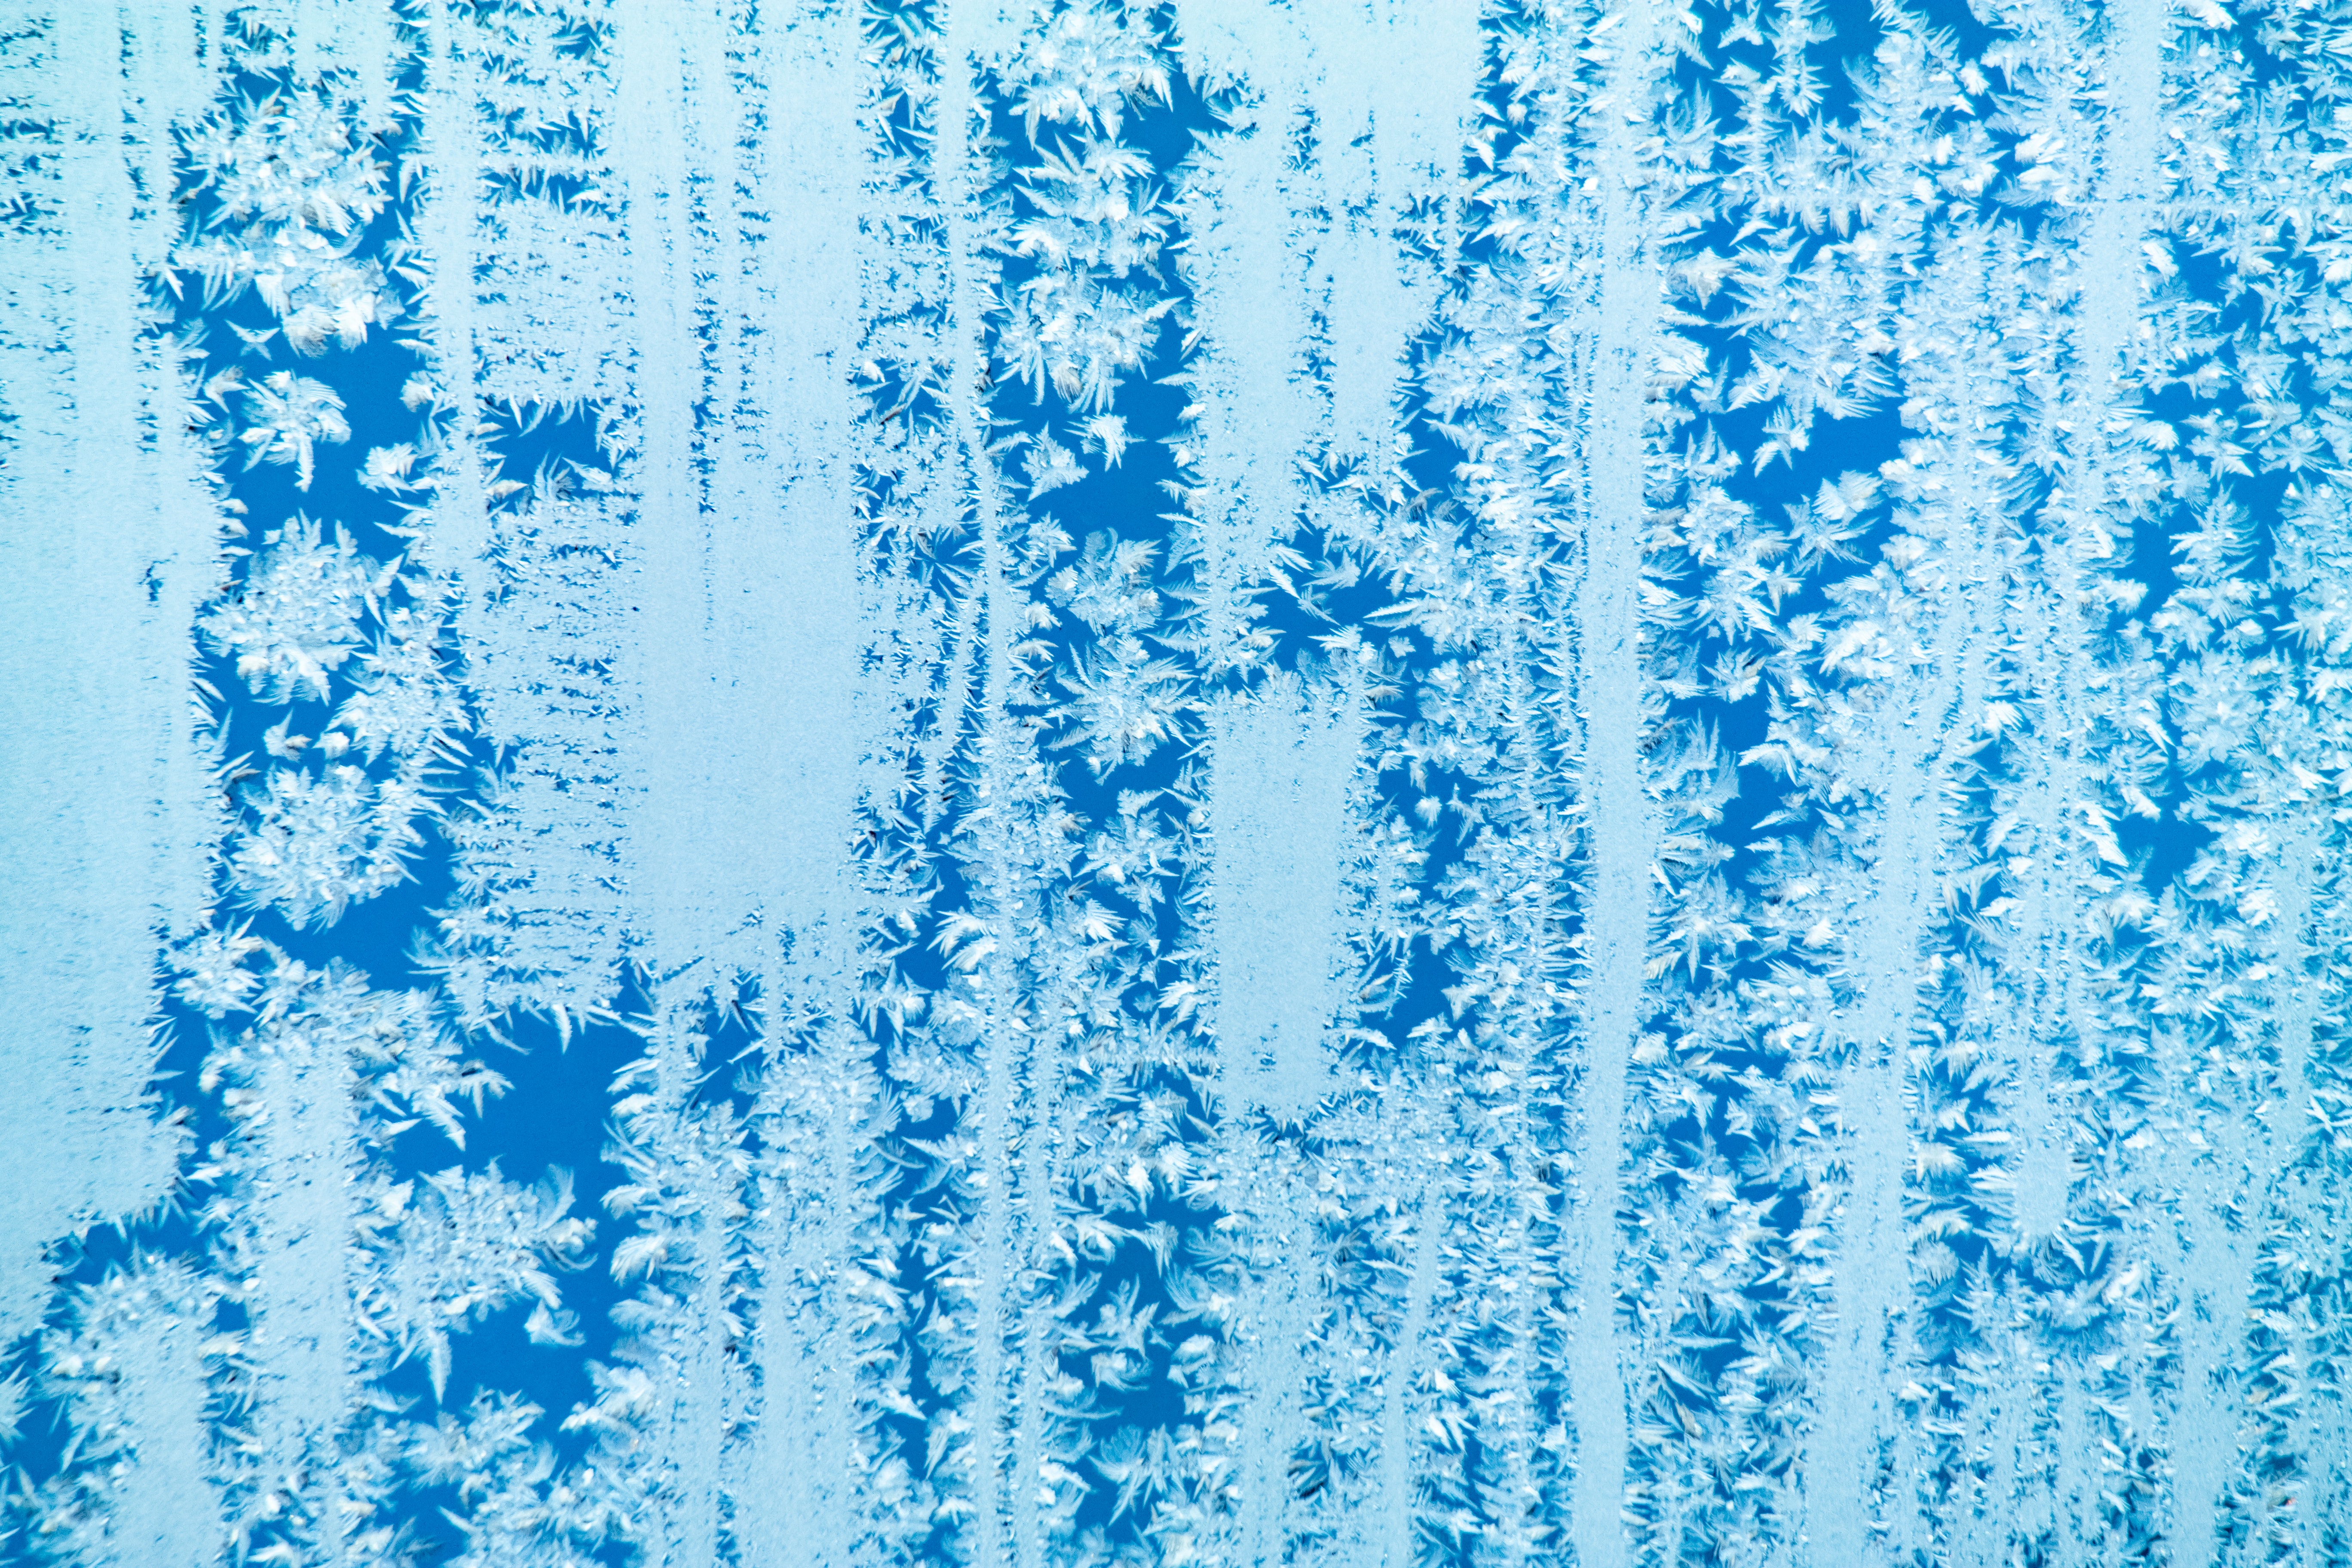 closeup of ice crystals formed on glass, representing a cold storage facility